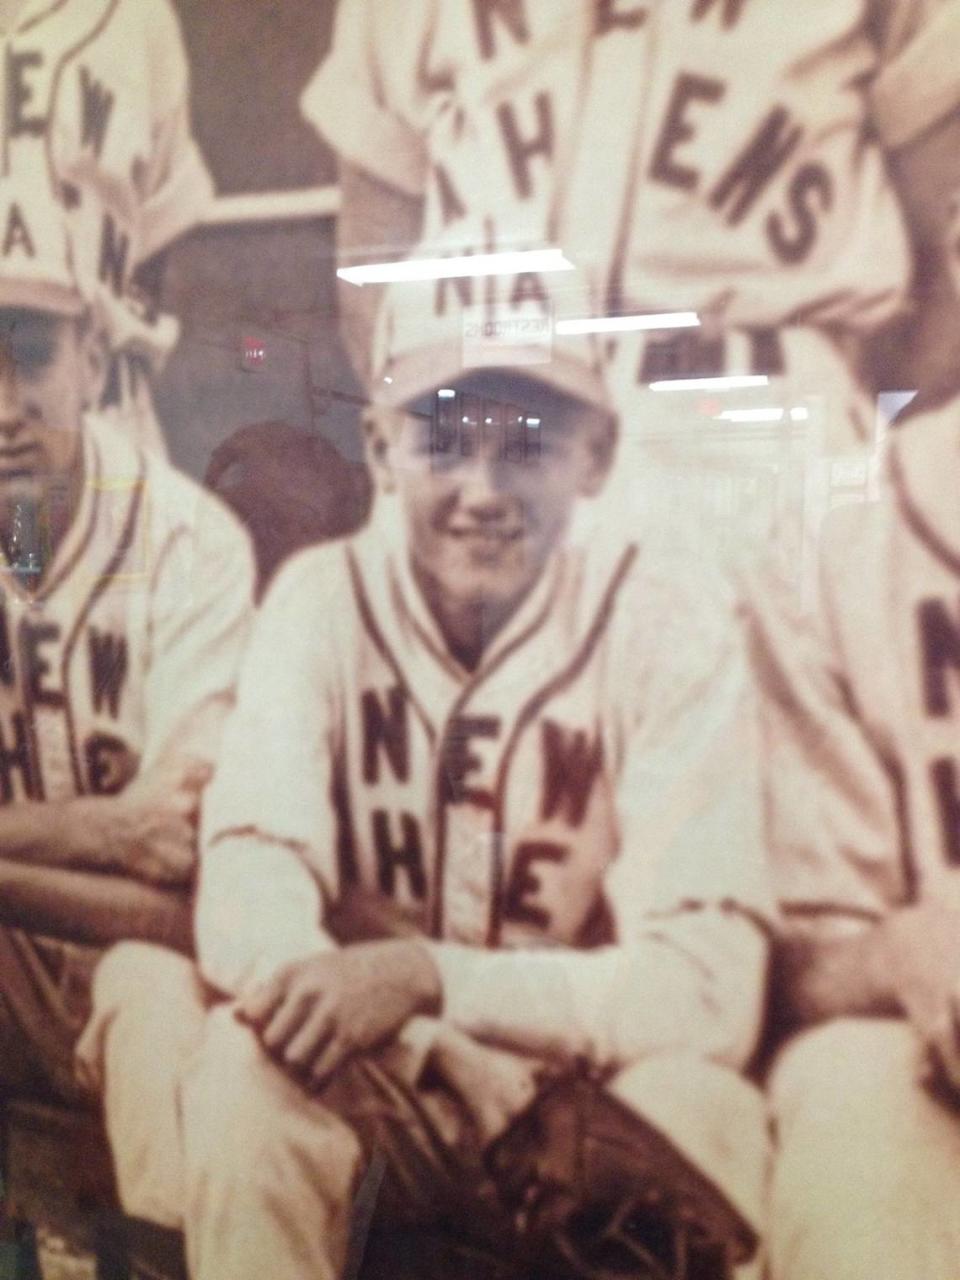 “Relly” Herzog as a member of the 1948 New Athens Yellowjackets baseball team.